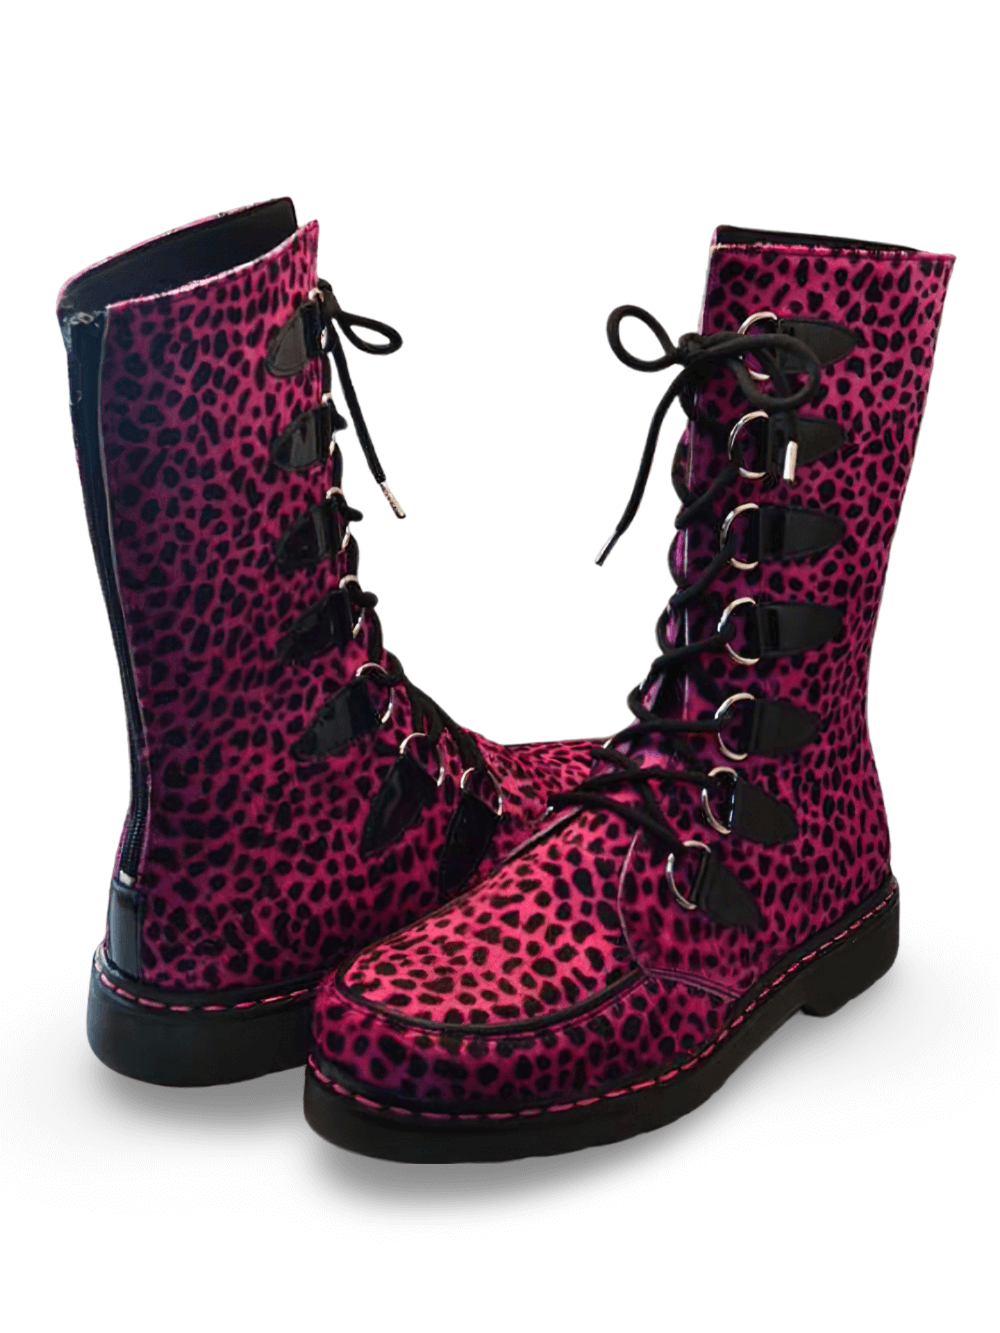 Pink Zippered Leopard Print Boots with PU Flat Sole